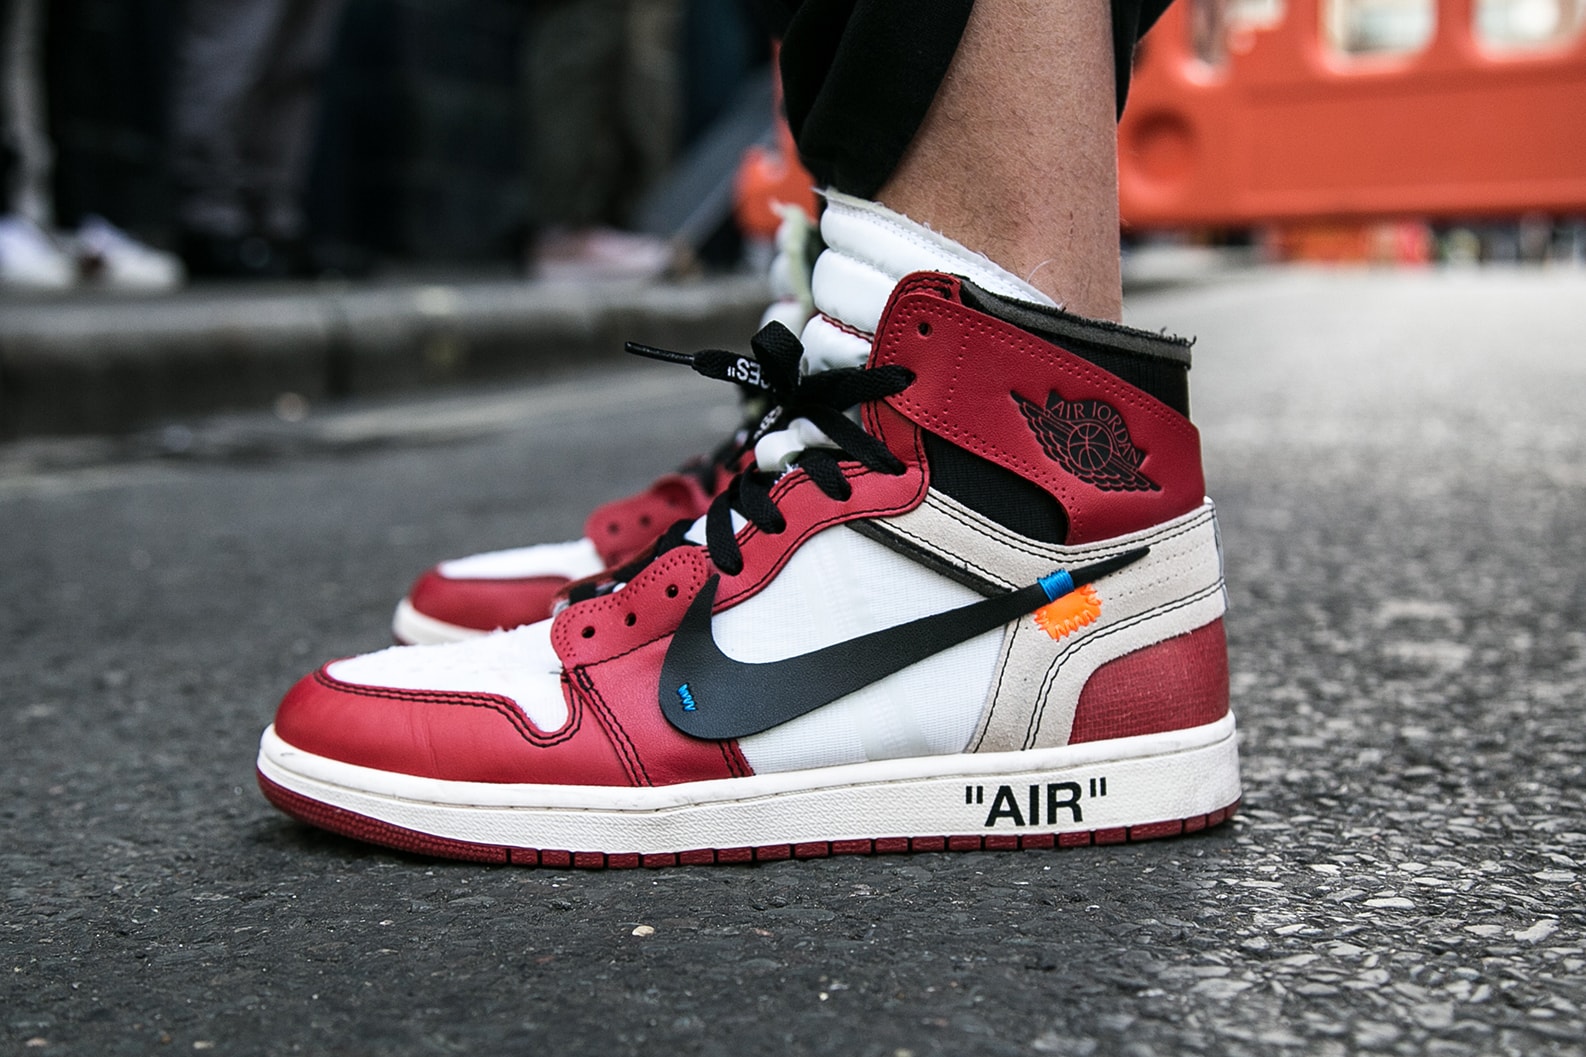 Why Off-White x Nike's The Ten Crashed SNKRS | HYPEBEAST